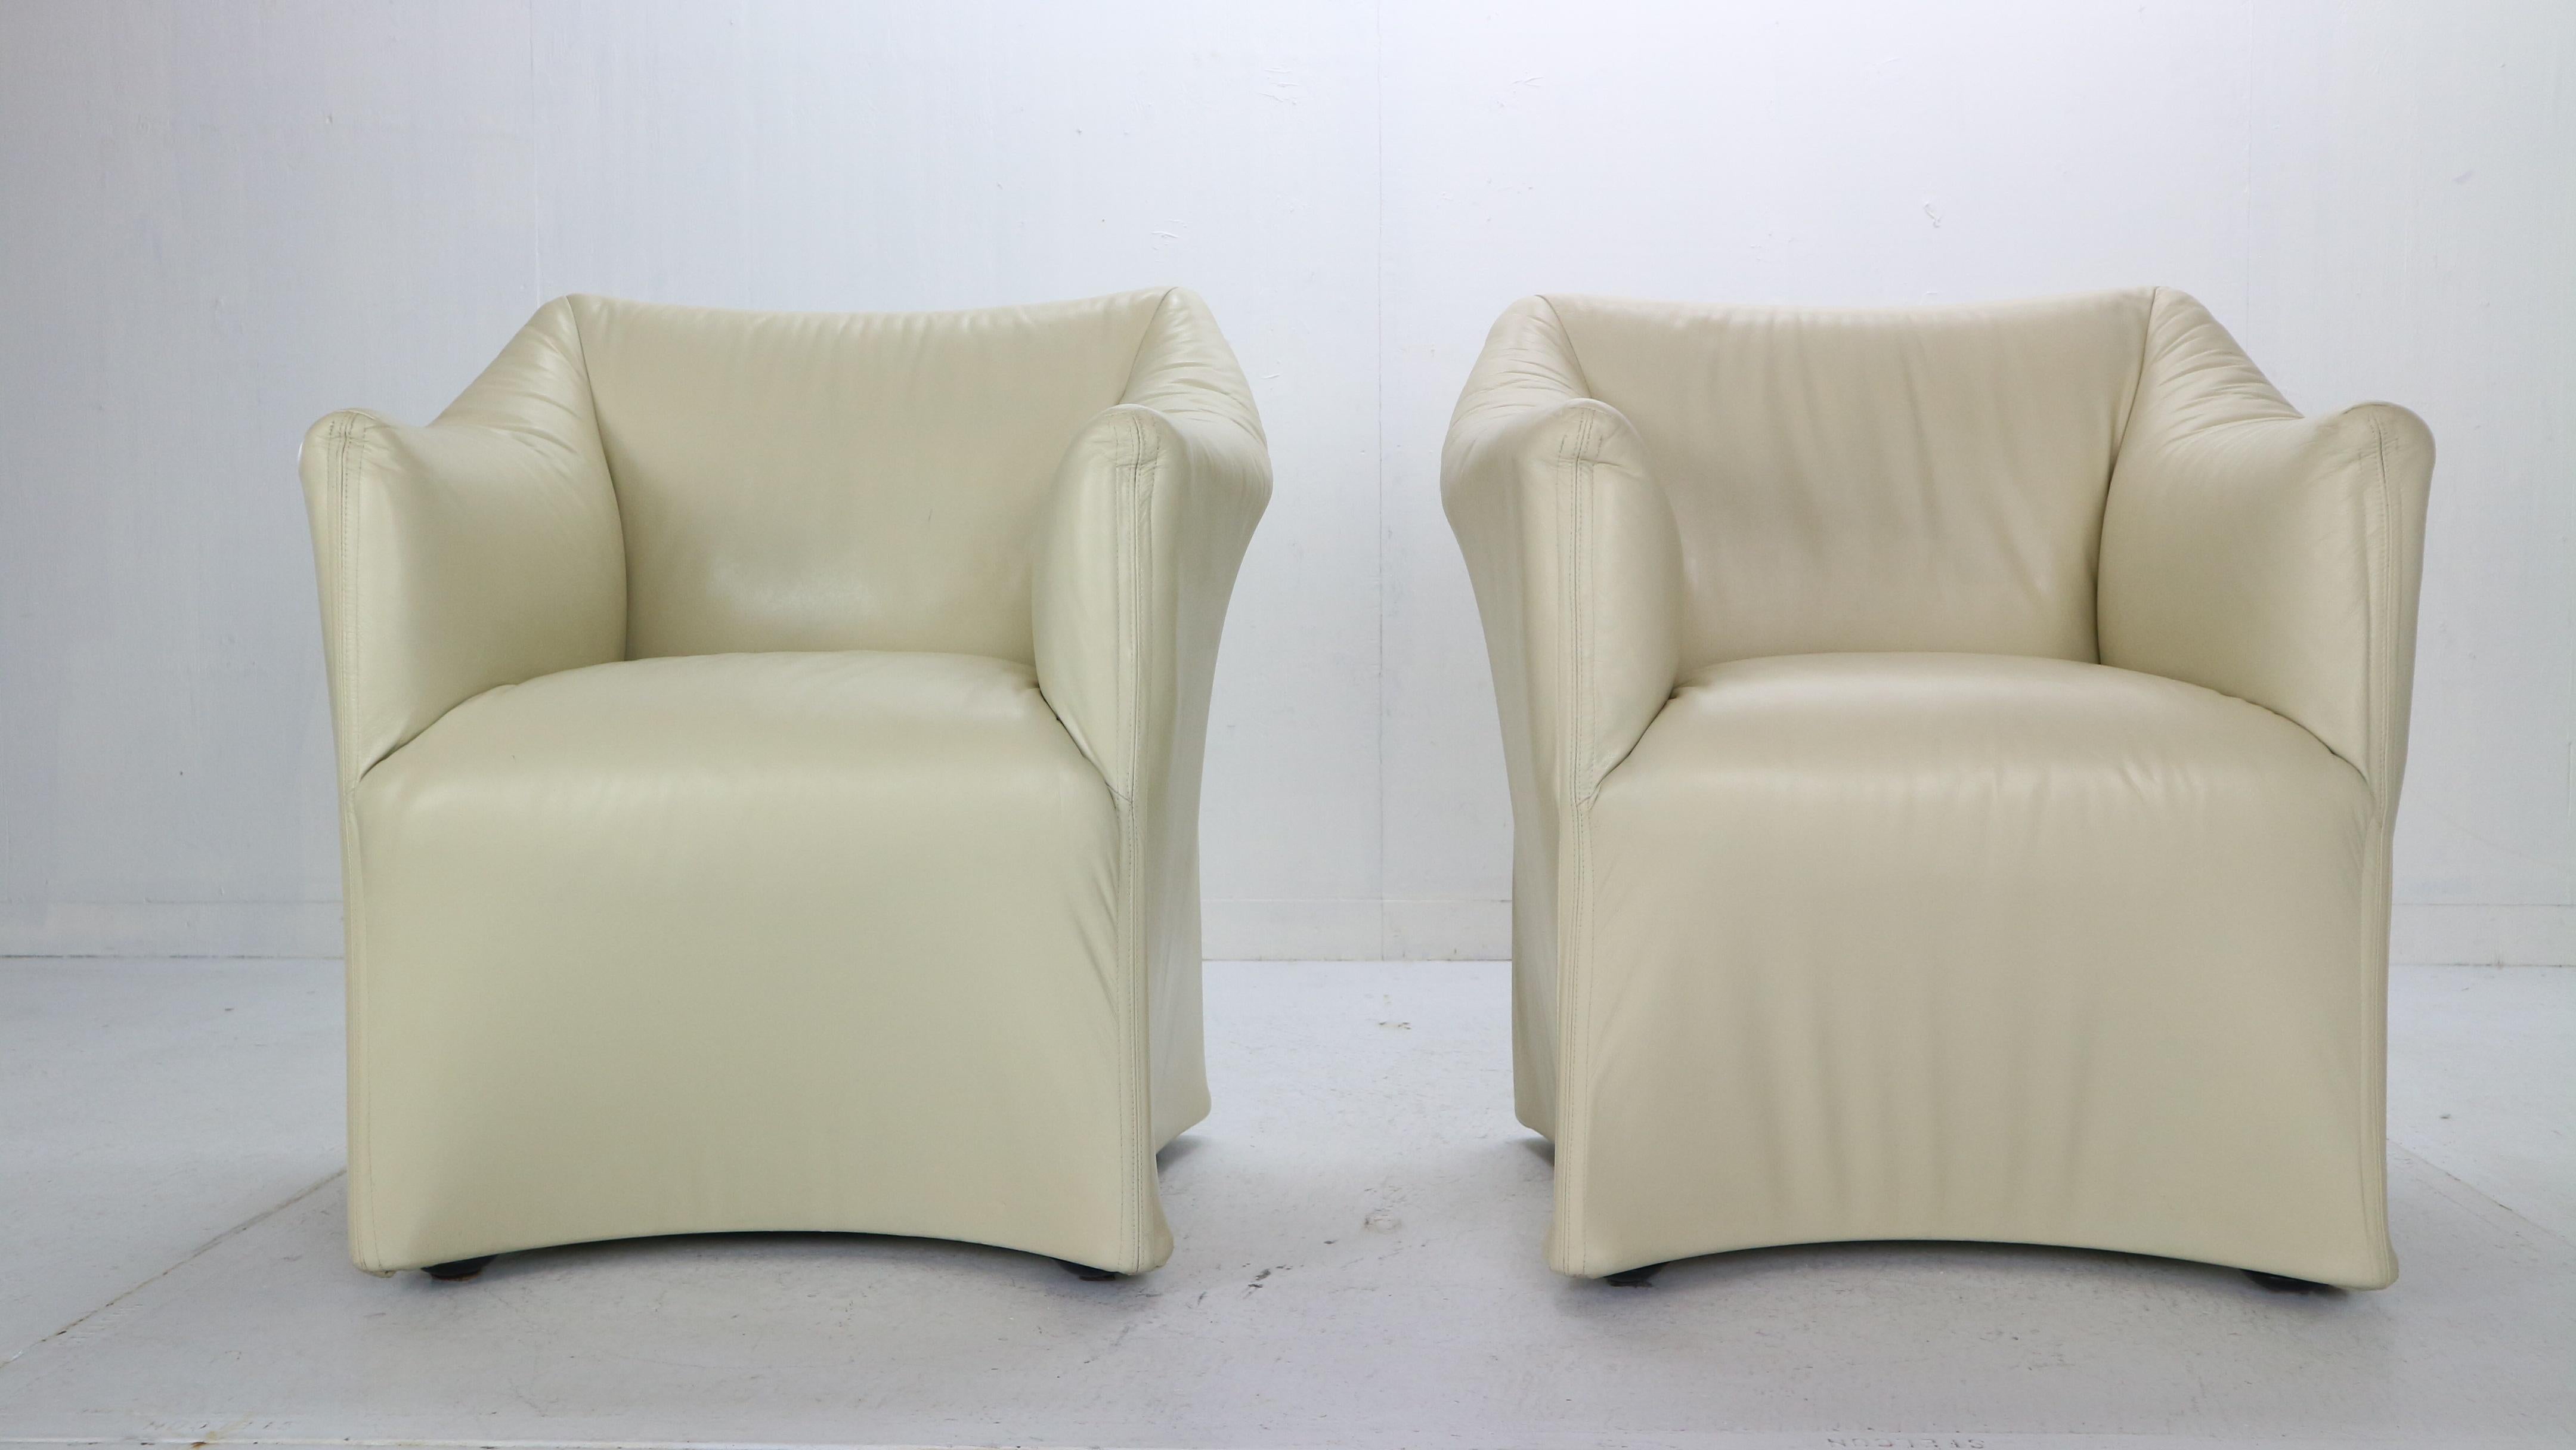 Pair of two lounge or armchairs designed by Mario Bellini for Cassina manufacture in 1970s period, Italy.
Model No: 684,
Crème color leather original upholstery, steel frame construction on casters.
Tentazione means temptation an inviting